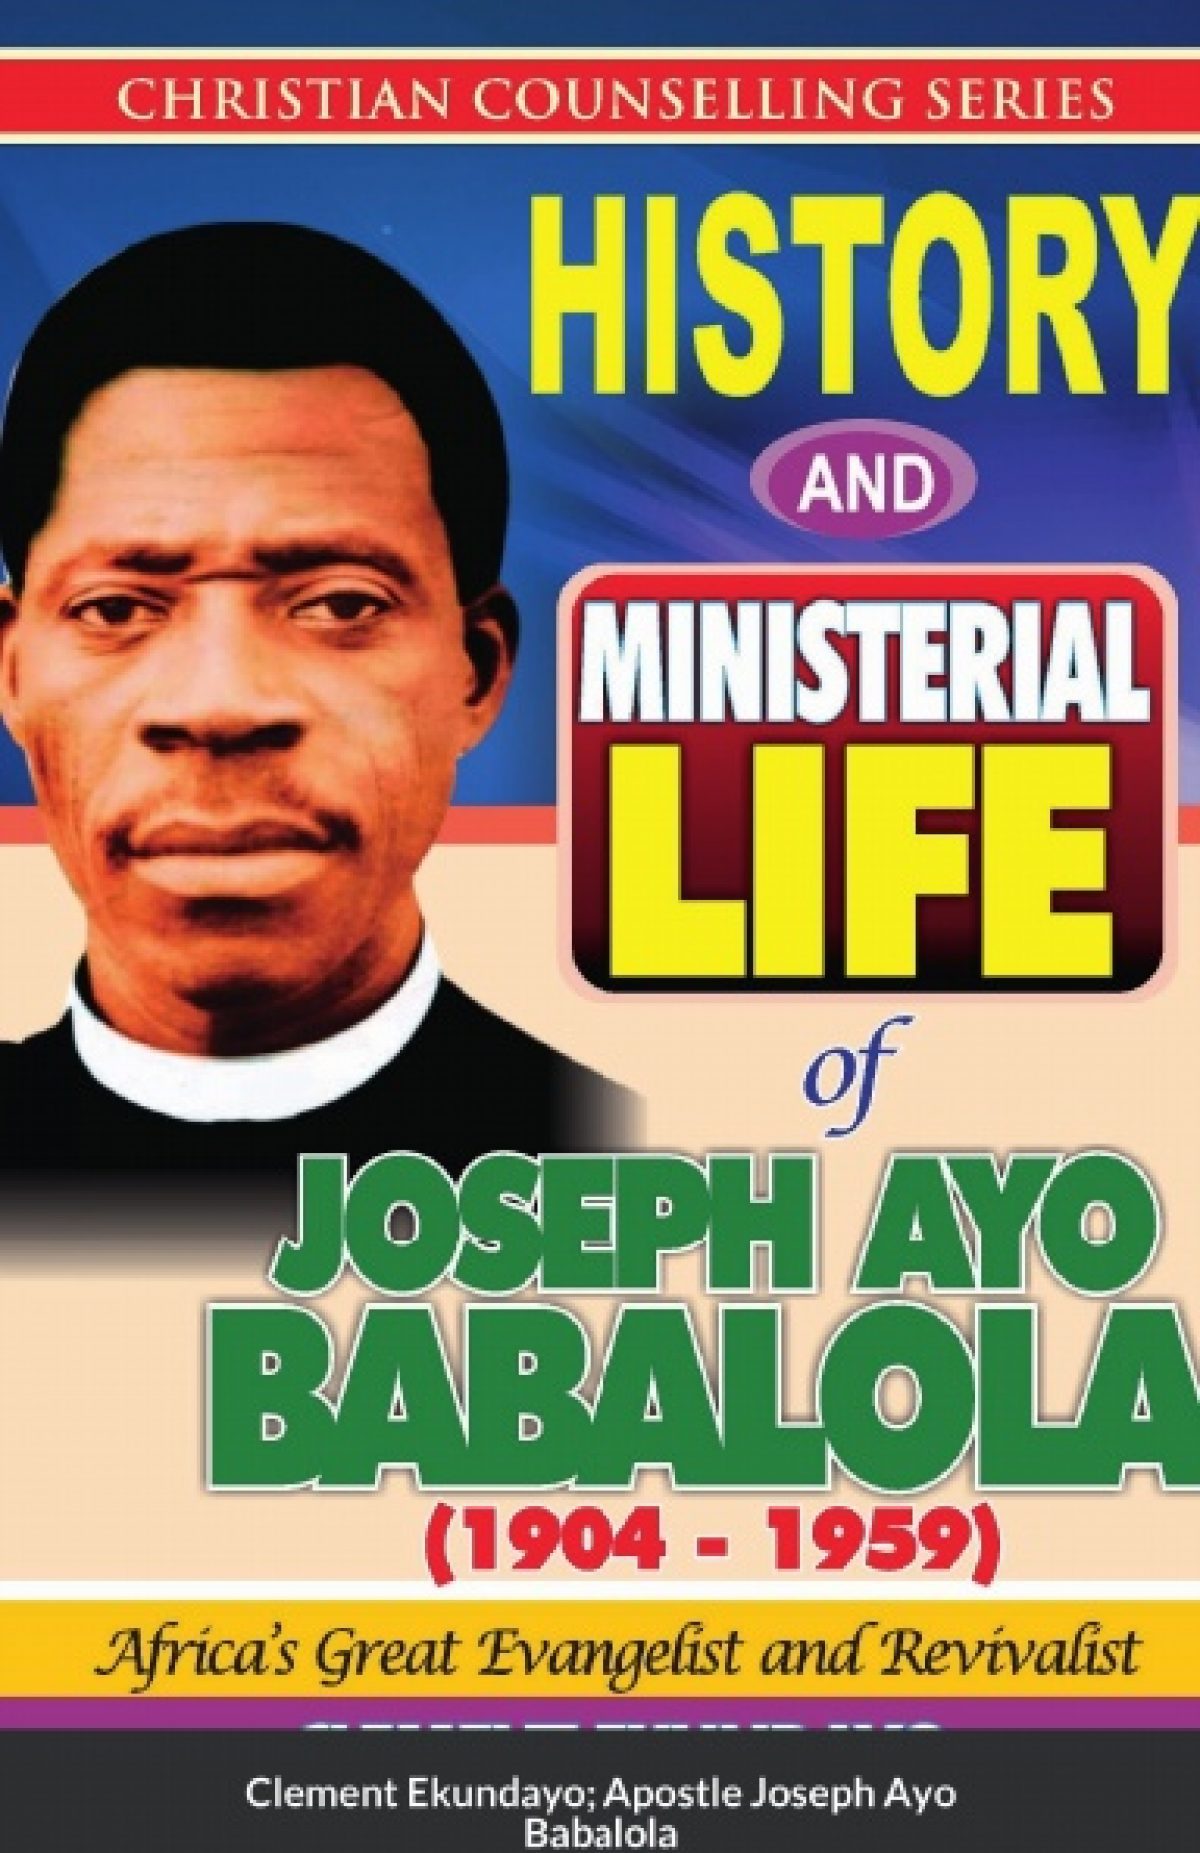 History and Ministerial Life of Apostle Joseph Ayo Babalola (1904-1959) - Paperback - Africa's Great Evangelist and Revivalist by Clement Ekundayo